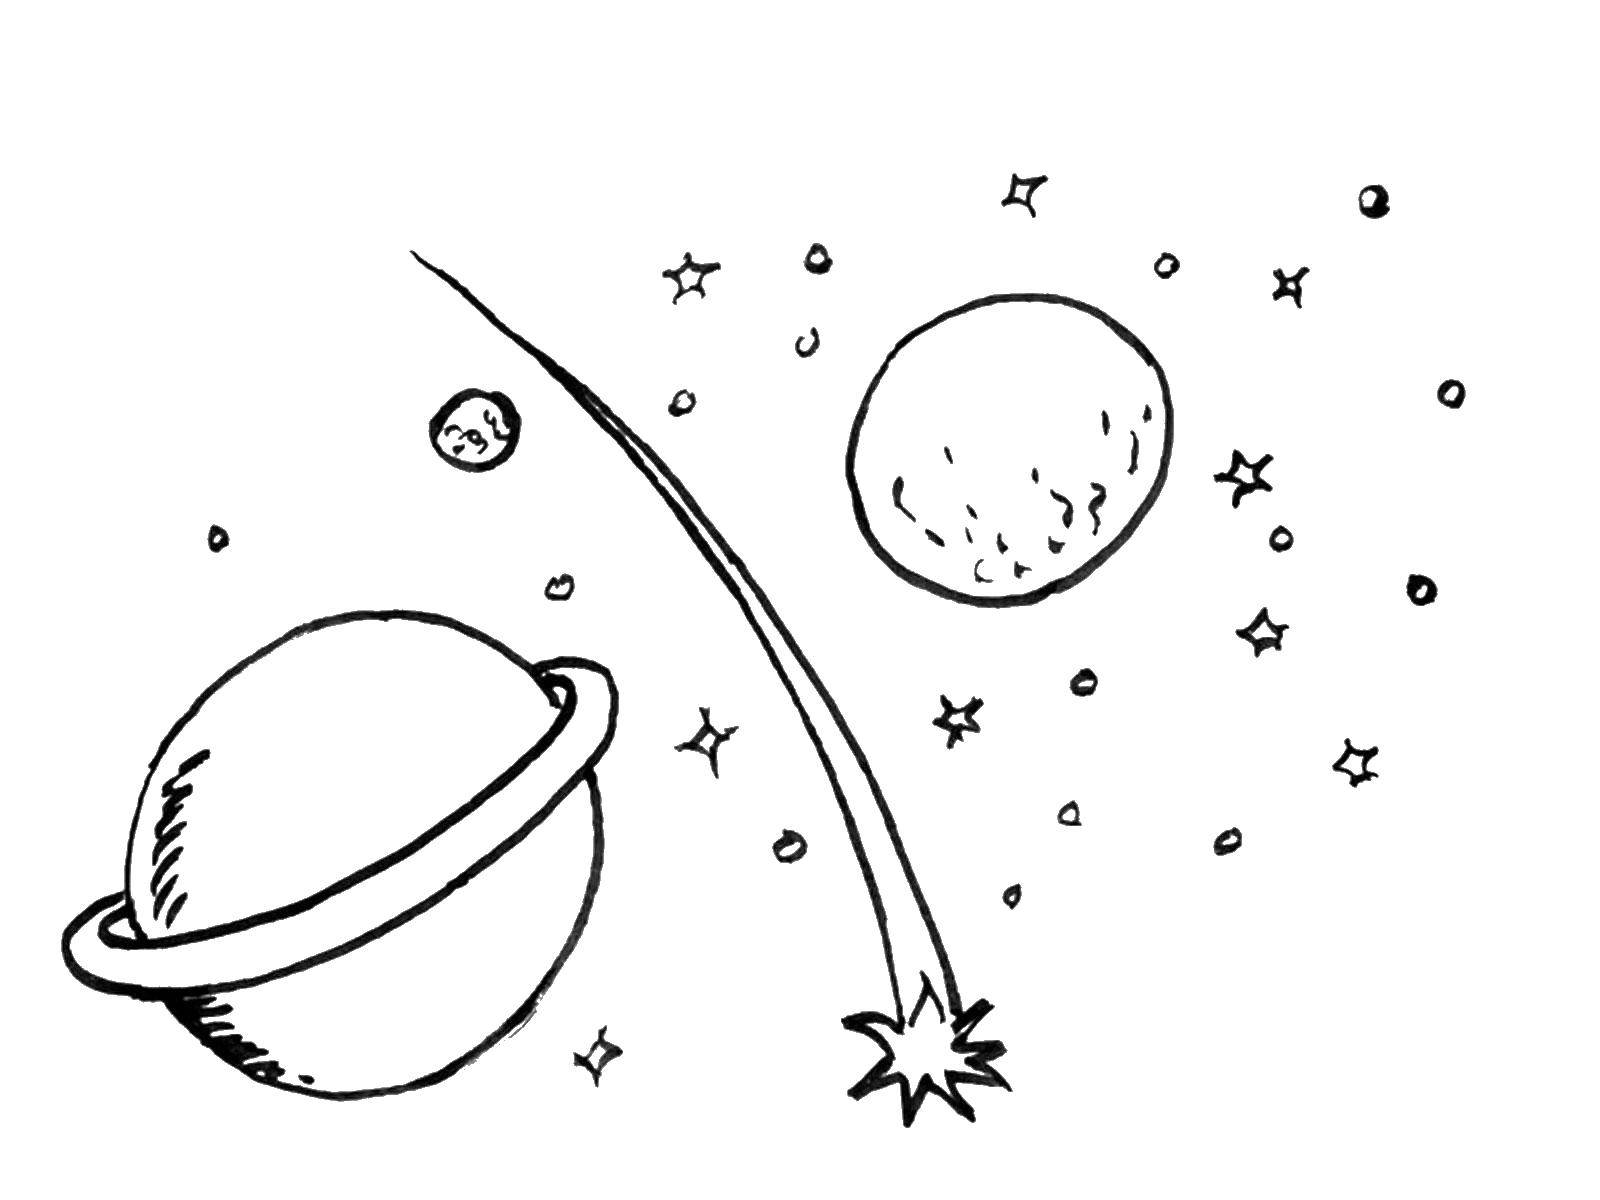 Coloring Comet between the planets. Category Space coloring pages. Tags:  Space, planet, universe, Galaxy.